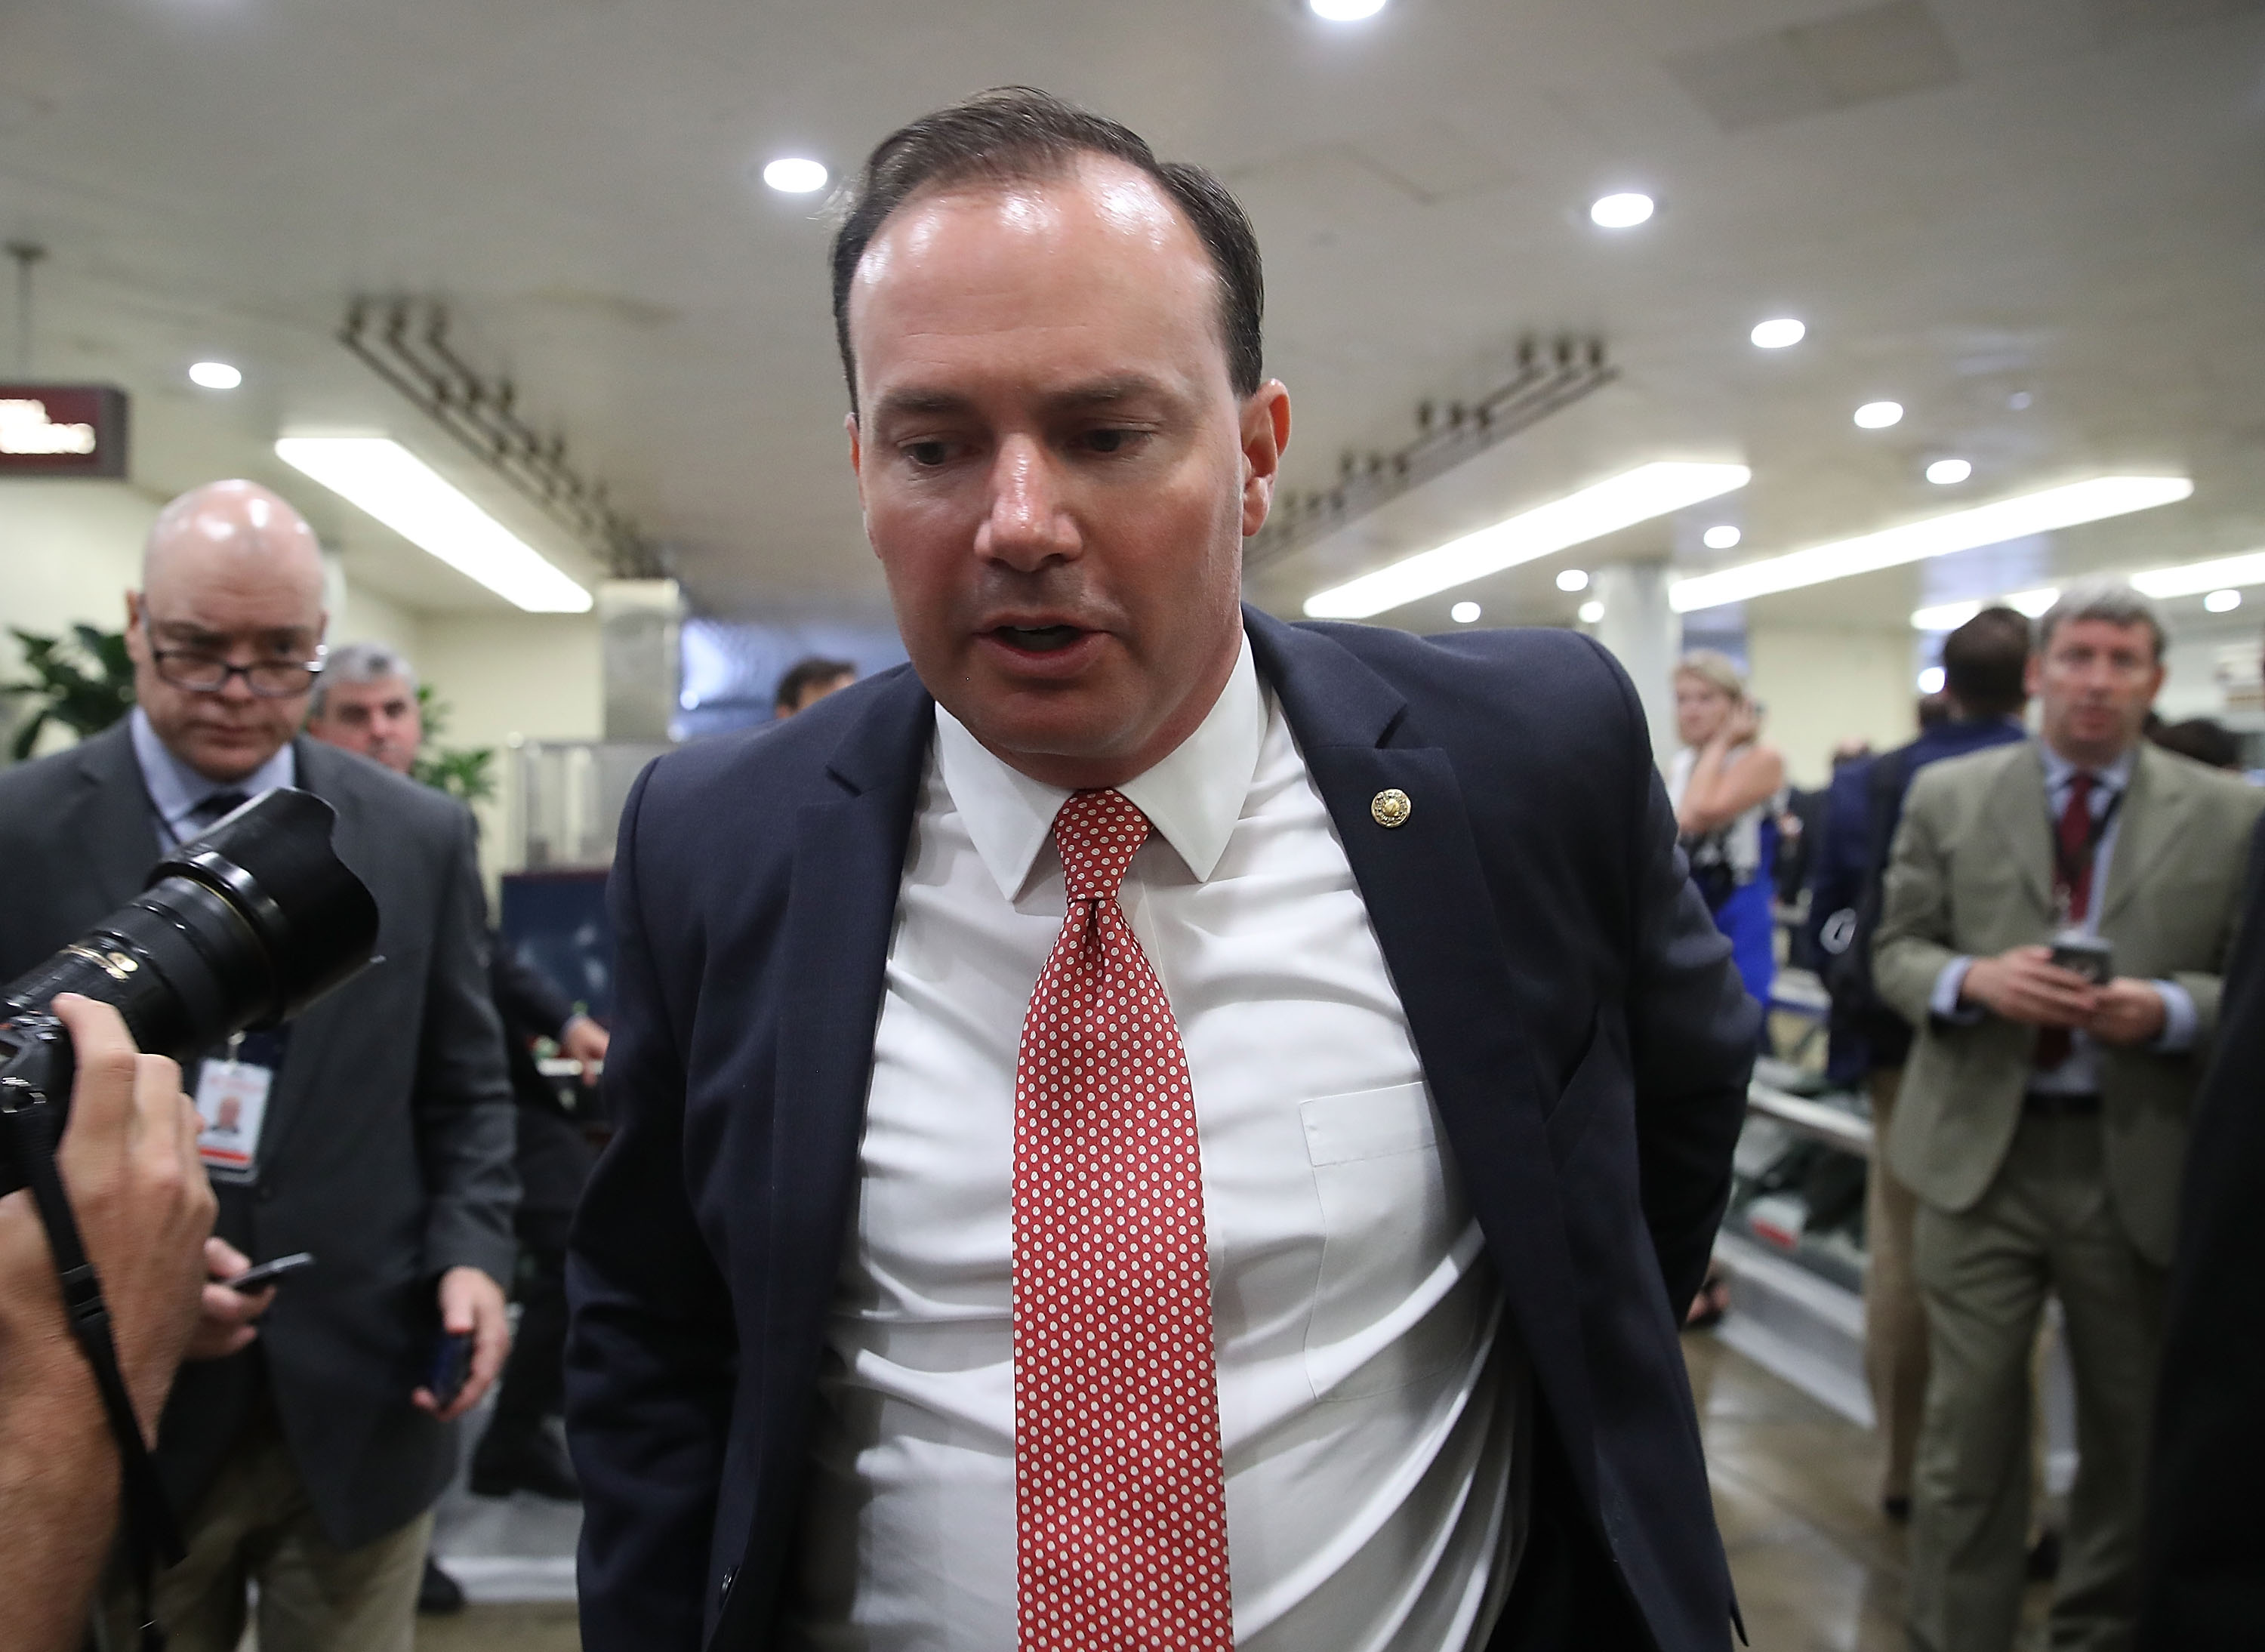 WASHINGTON, DC - JULY 18: Sen. Mike Lee (R-UT) walks past reporters inside the US Capitol on July 18, 2017 in Washington, DC. Sen. Lee said he would vote no Senate Majority Leader Mitch McConnell's bid to overhaul the Affordable Care Act. (Photo by Mark Wilson/Getty Images)